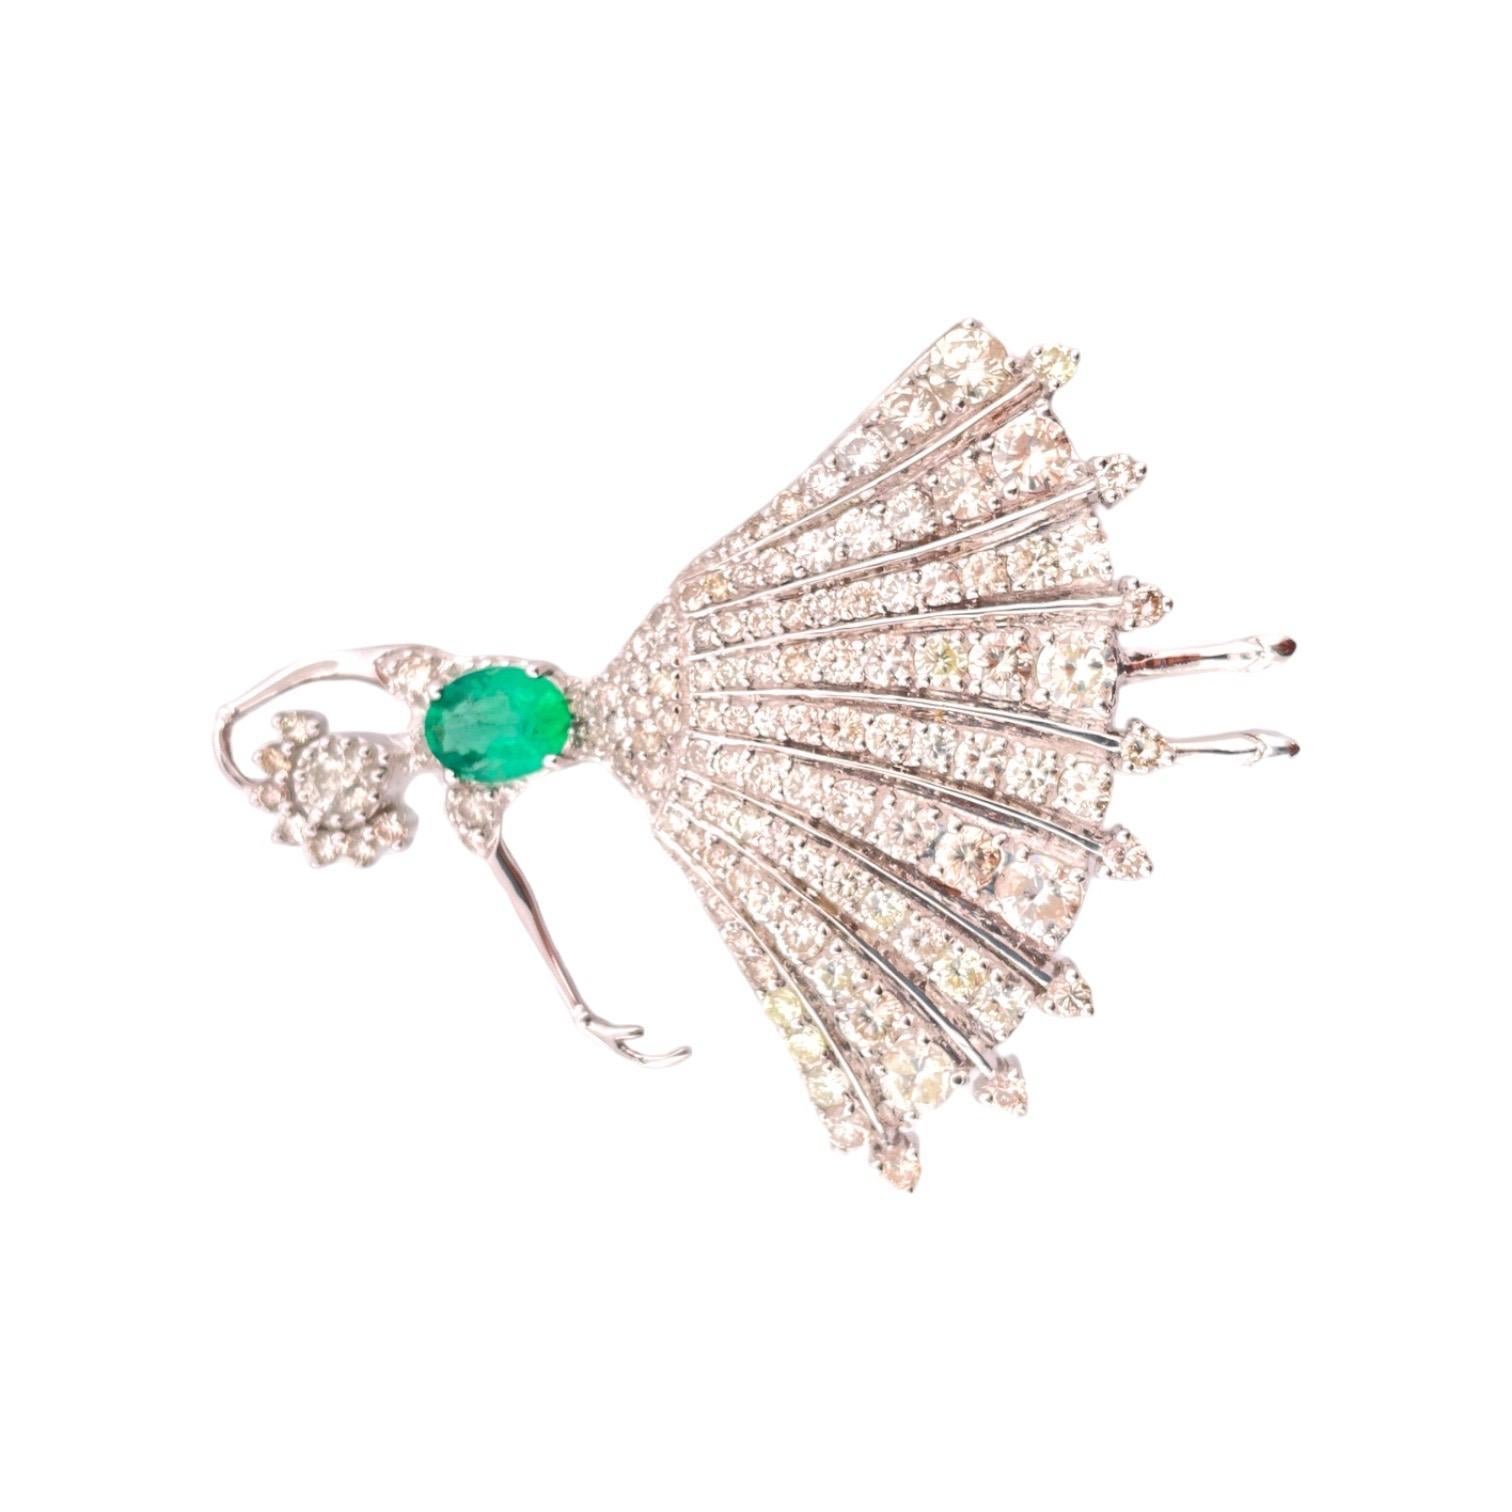 Adorn your attire with the grace and beauty of our Elegant Ballerina Emerald and Diamond Brooch, featuring a total carat weight of 4.76 in 14K white gold. This stunning brooch weighs 18.04 grams and showcases a central 1.03 carat emerald and an